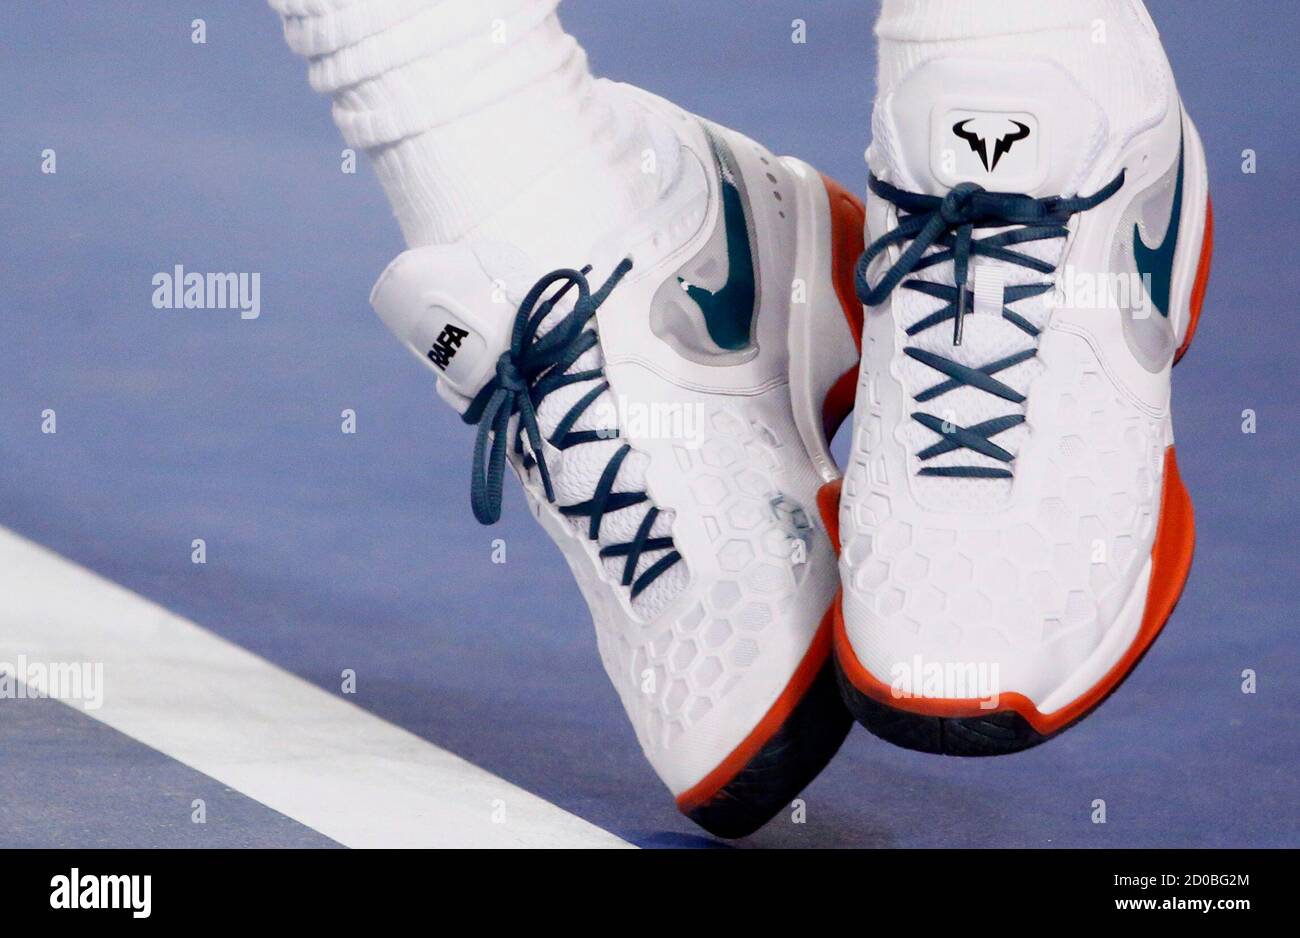 The word "Rafa" and the logo of a bull are seen on Rafael Nadal of Spain's  pair of Nike shoes as he serves to Thanasi Kokkinakis of Australia during  their men's singles